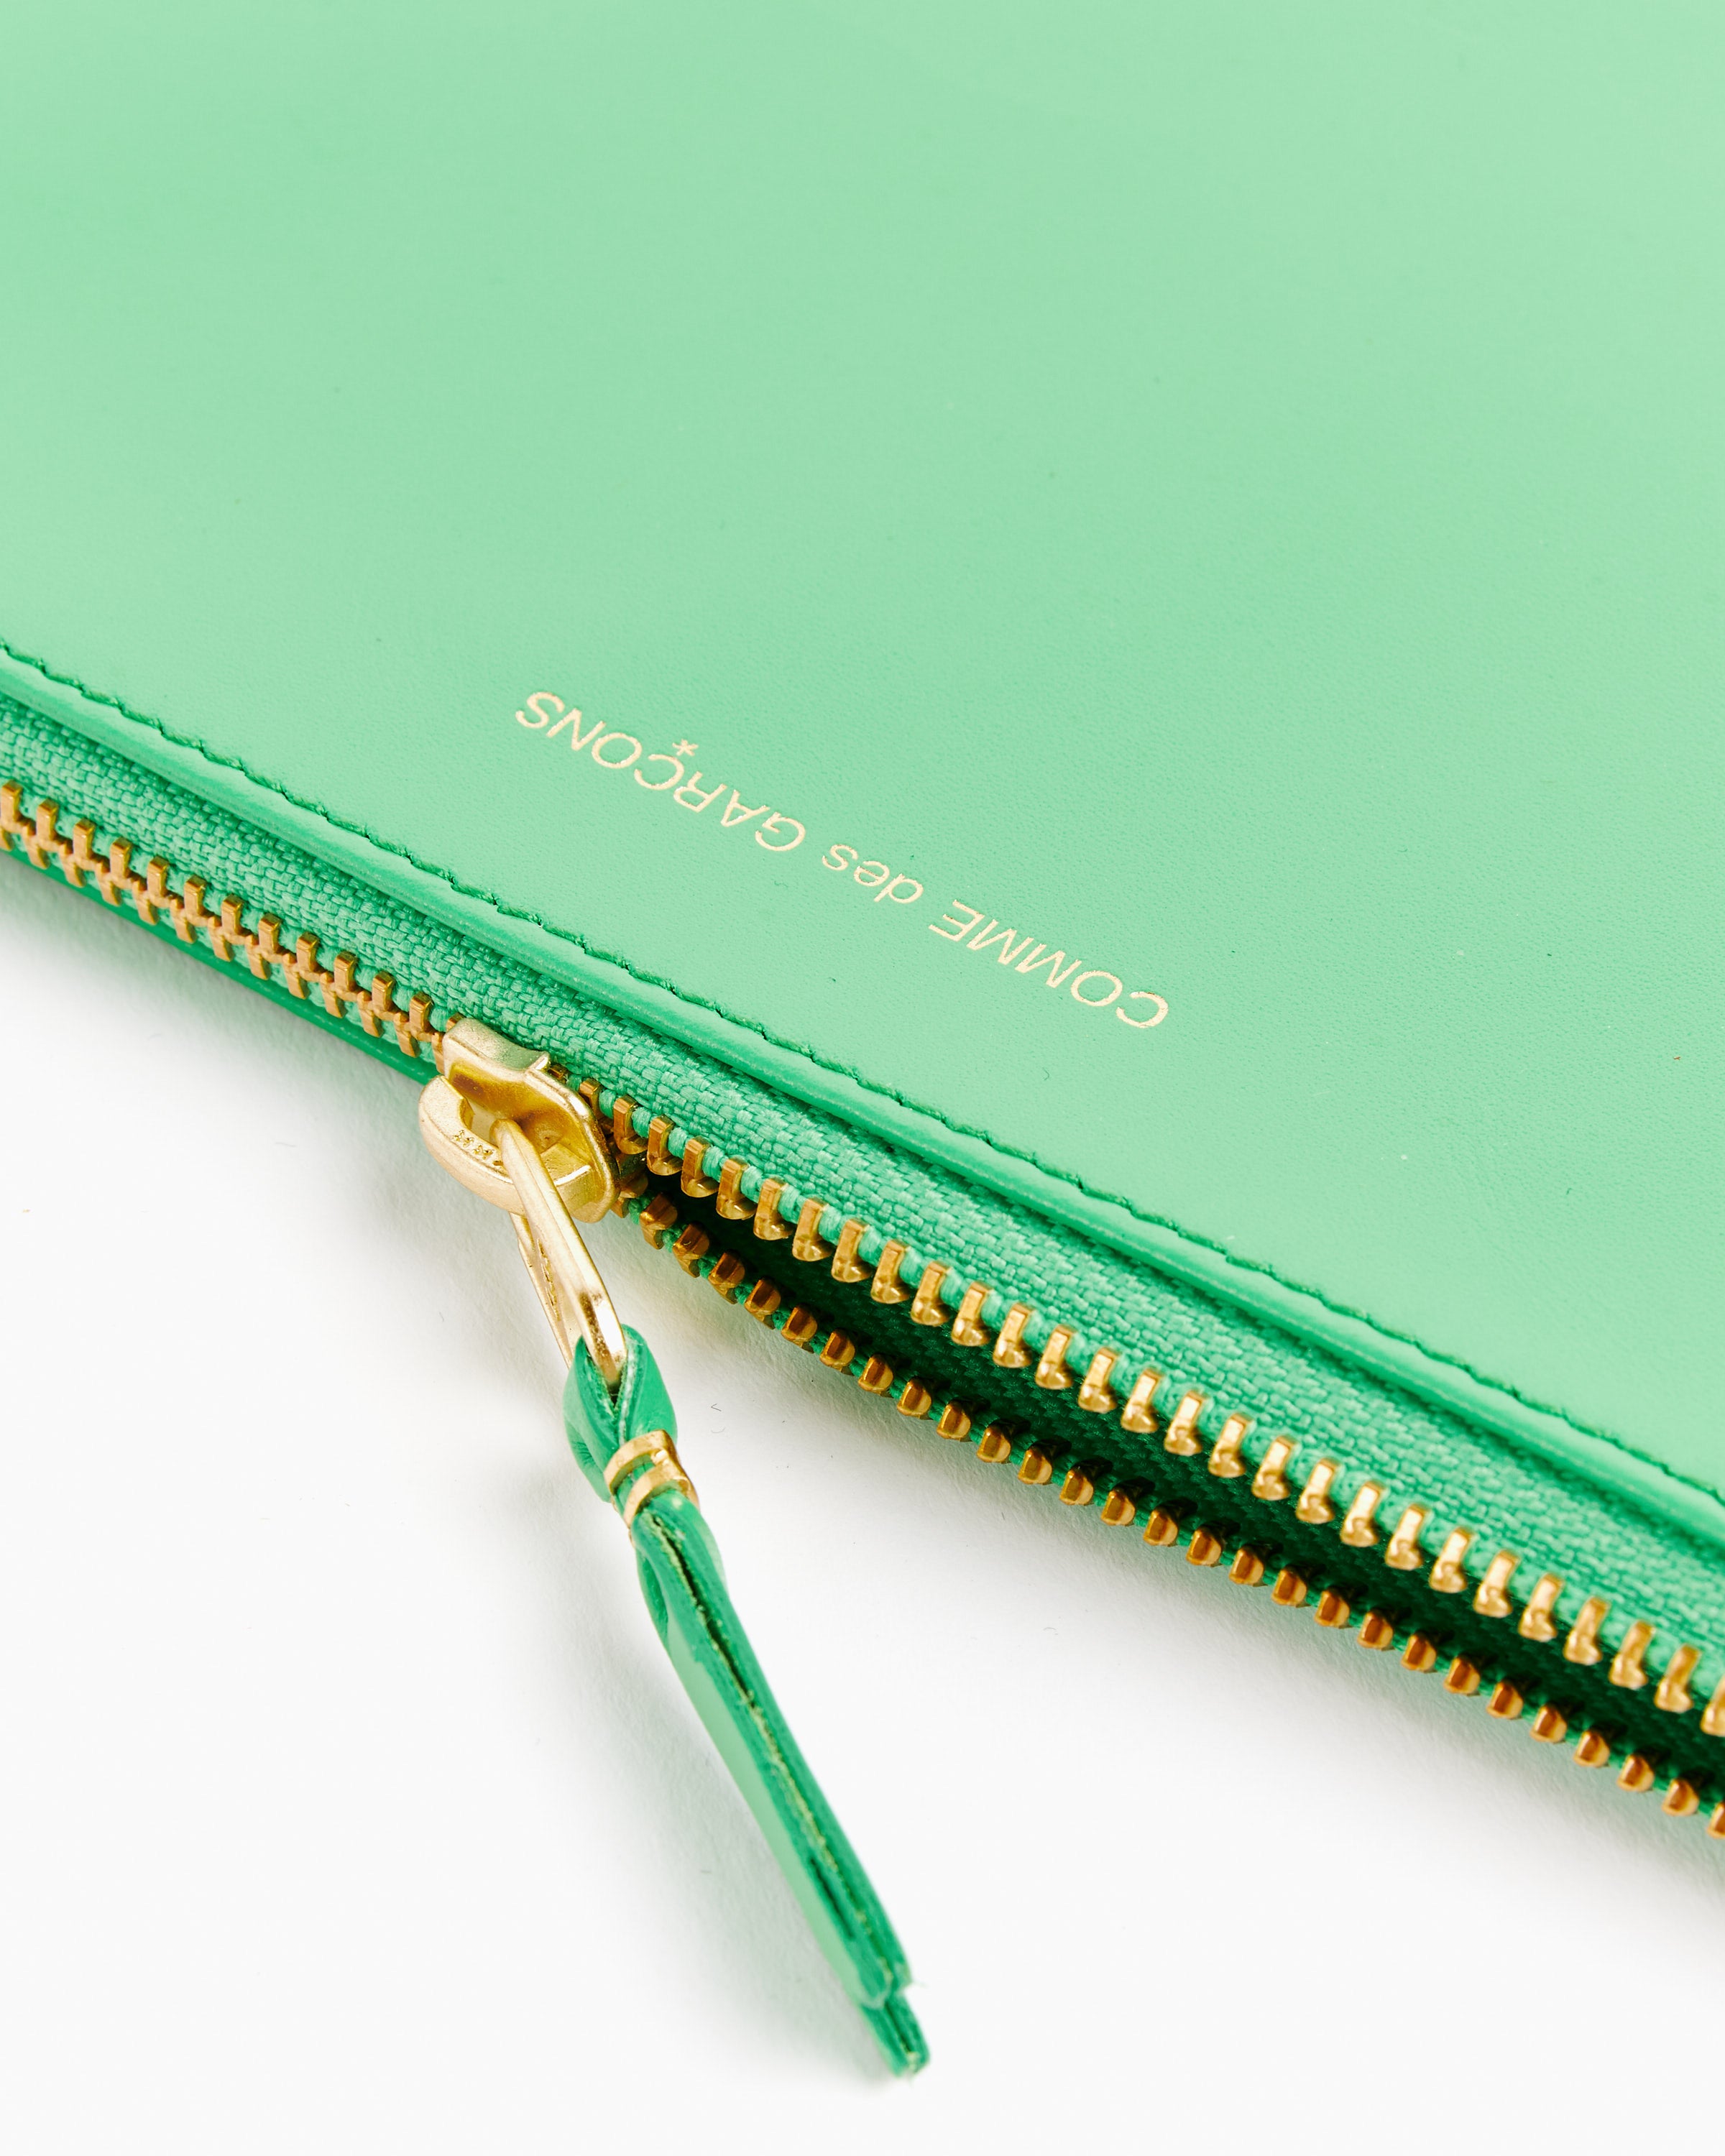 Classic Zip Pouch in Green